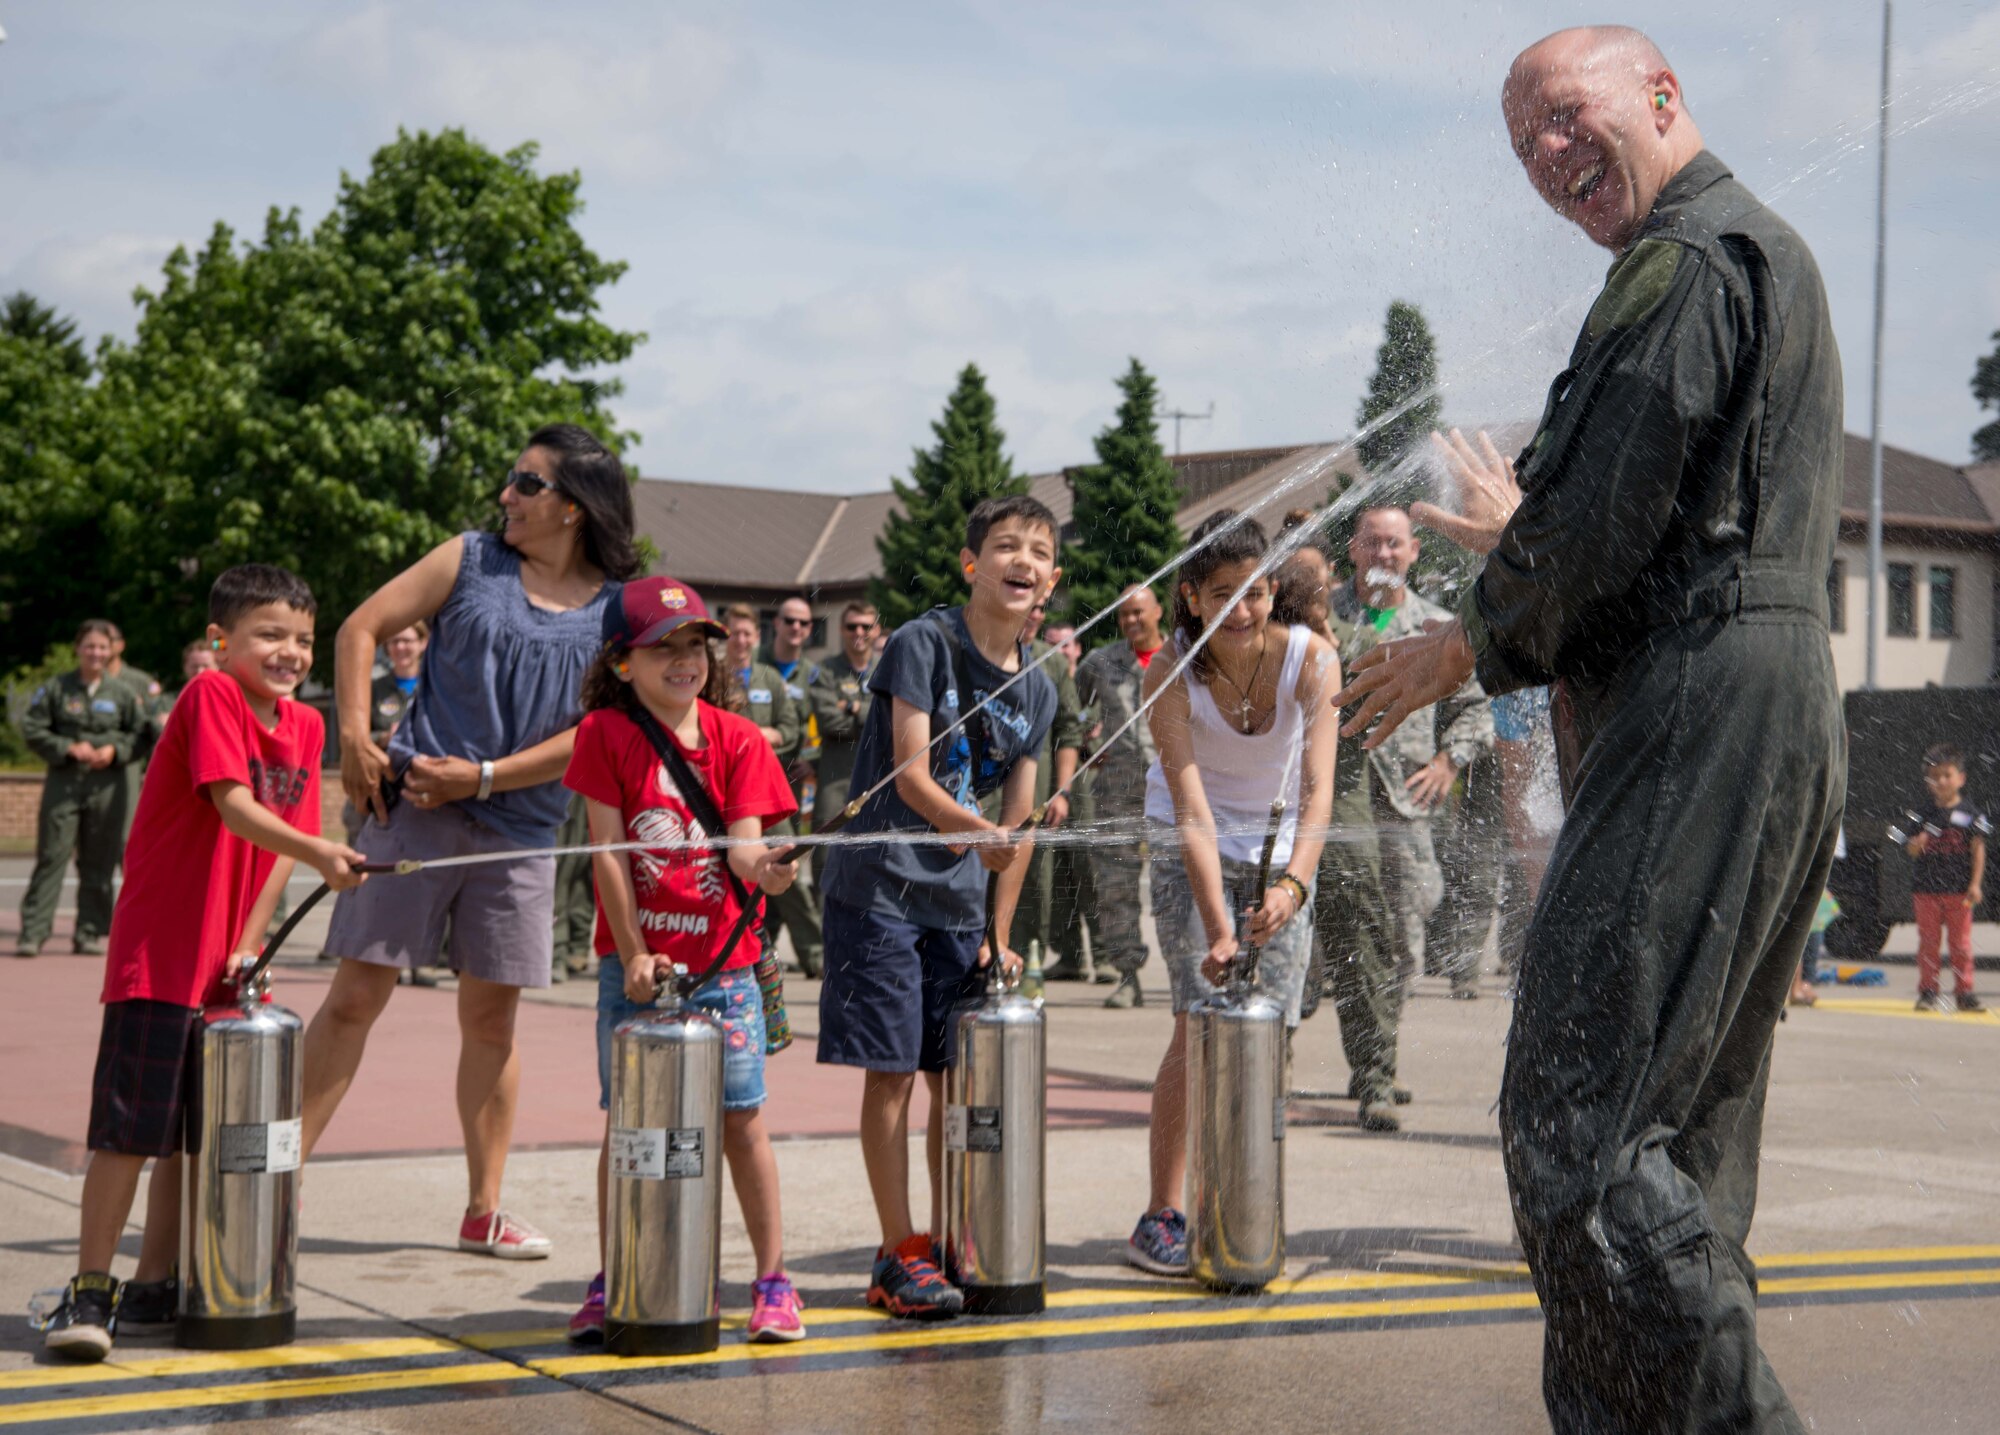 Col. Gerald Donohue, 86th Operations Group commander, laughs as his family sprays him with water at Ramstein Air Base, Germany, June 23, 2017. Donohue participated in the Air Force tradition of a final flight, or "fini" flight, in which a transitioning aircrew member performs his final flight, and then friends and family greet and spray him down. (U.S. Air Force photo by Senior Airman Elizabeth Baker)